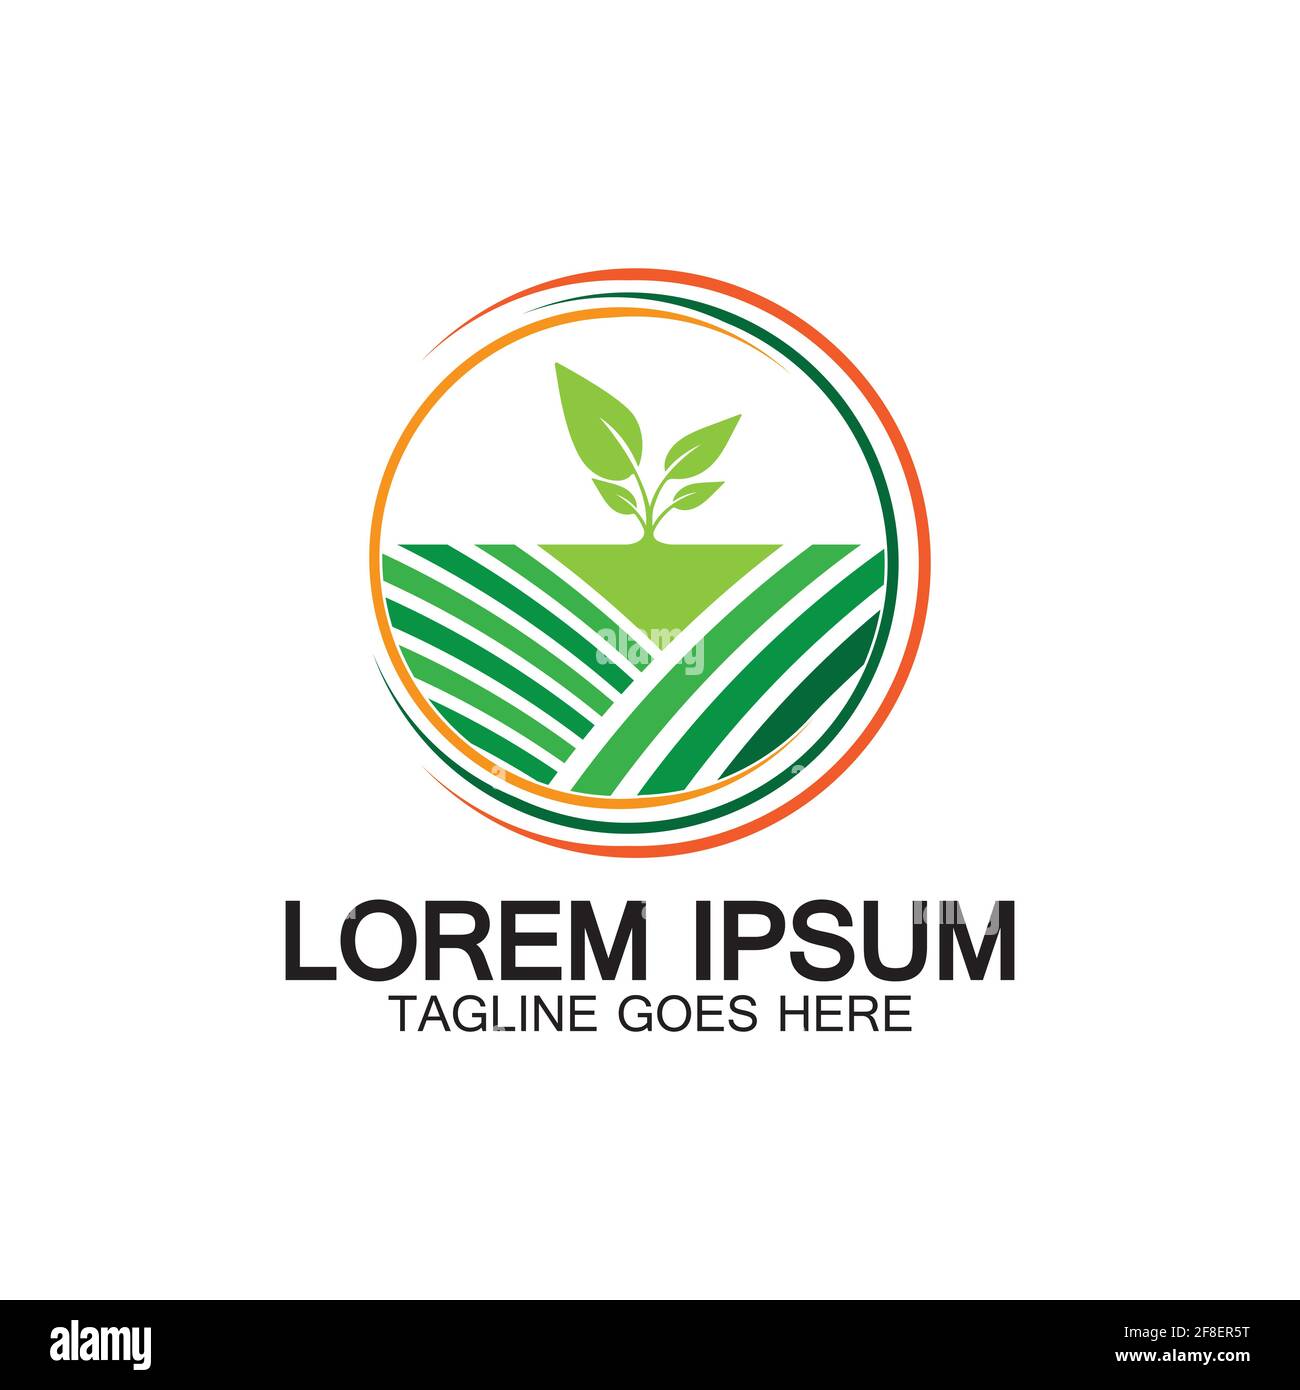 agriculture logo vector